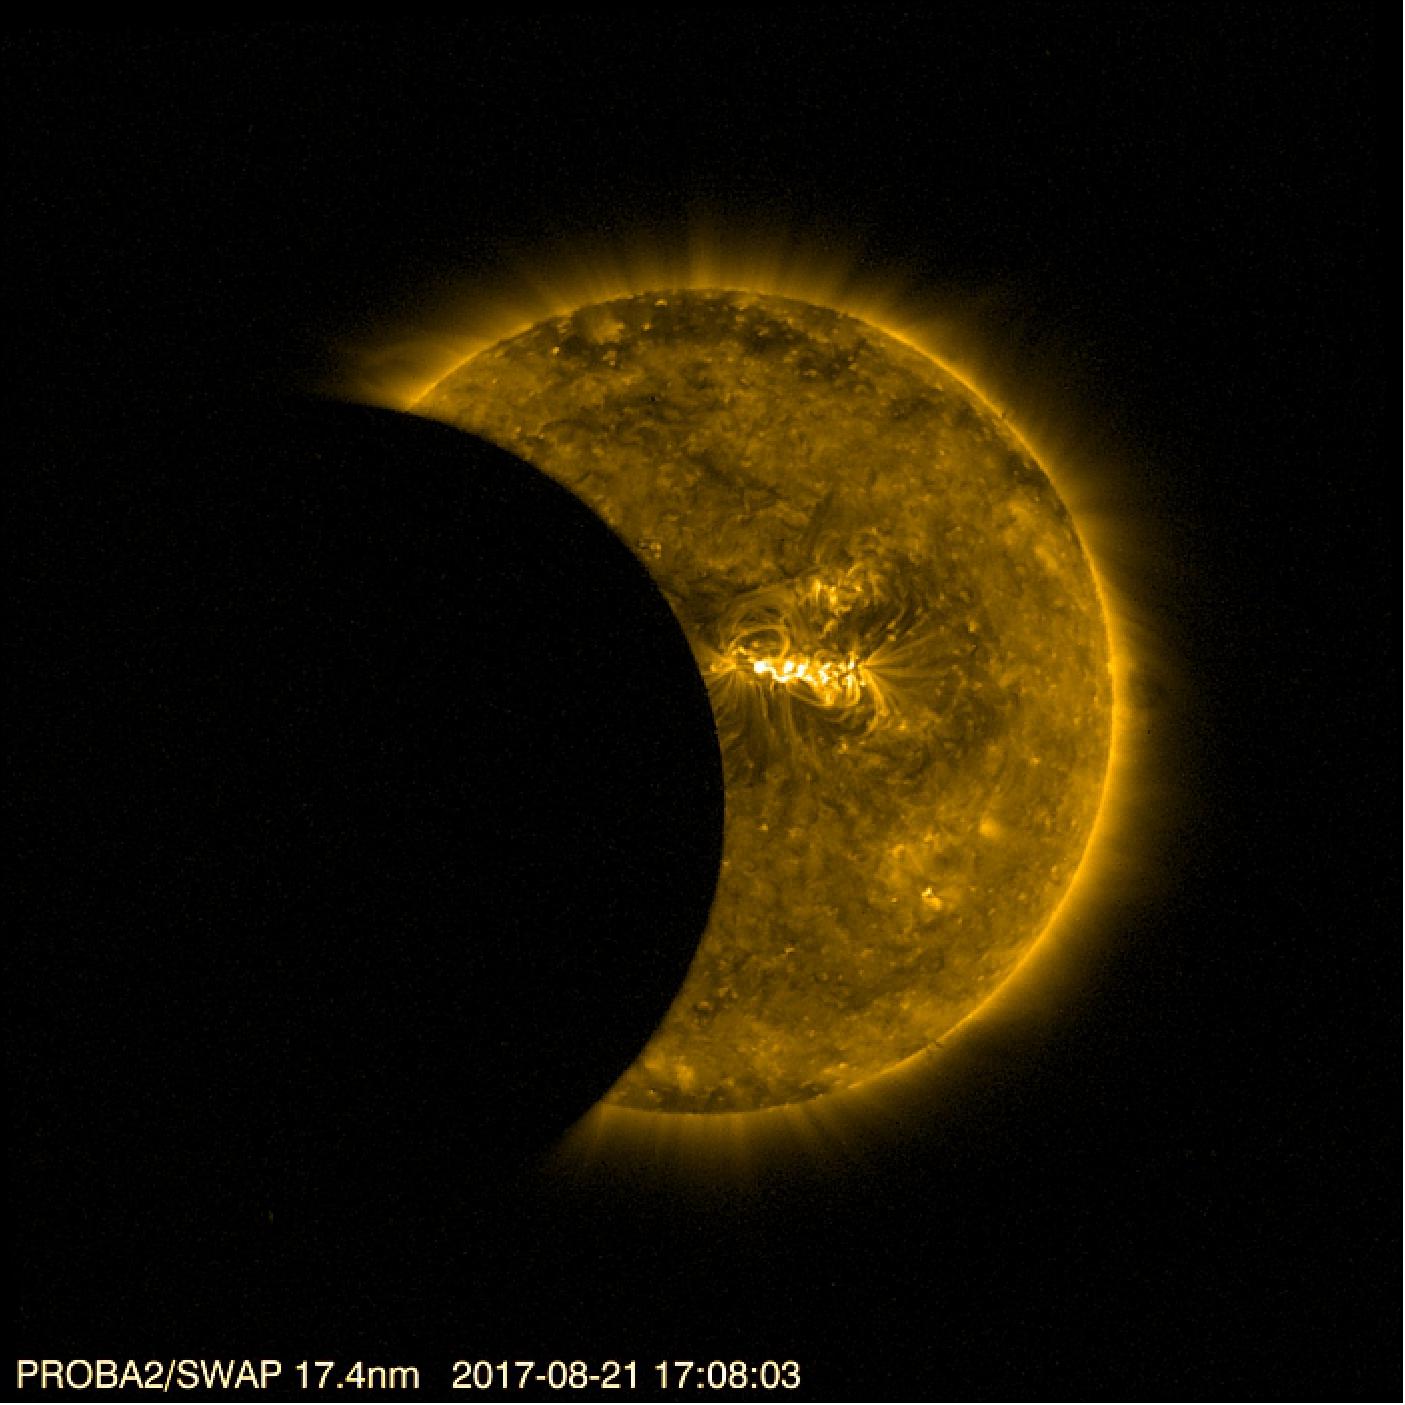 Figure 28: As the US enjoyed a total solar eclipse on 21 August 2017, ESA's Sun-watching Proba-2 satellite captured partial eclipses from its viewpoint, 800 km above Earth. Proba-2 orbits Earth about 14.5 times per day, and thanks to the constant change in viewing angle, it can dip in and out of the Moon's shadow several times during a solar eclipse. This still image shows one of the first images available from today's eclipse, taken at 17:08 GMT. The image was taken by the SWAP imager, and shows the solar disc in extreme-ultraviolet light to capture its turbulent surface and swirling corona corresponding to temperatures of about a million degrees (image credit: ESA/Royal Observatory Belgium)